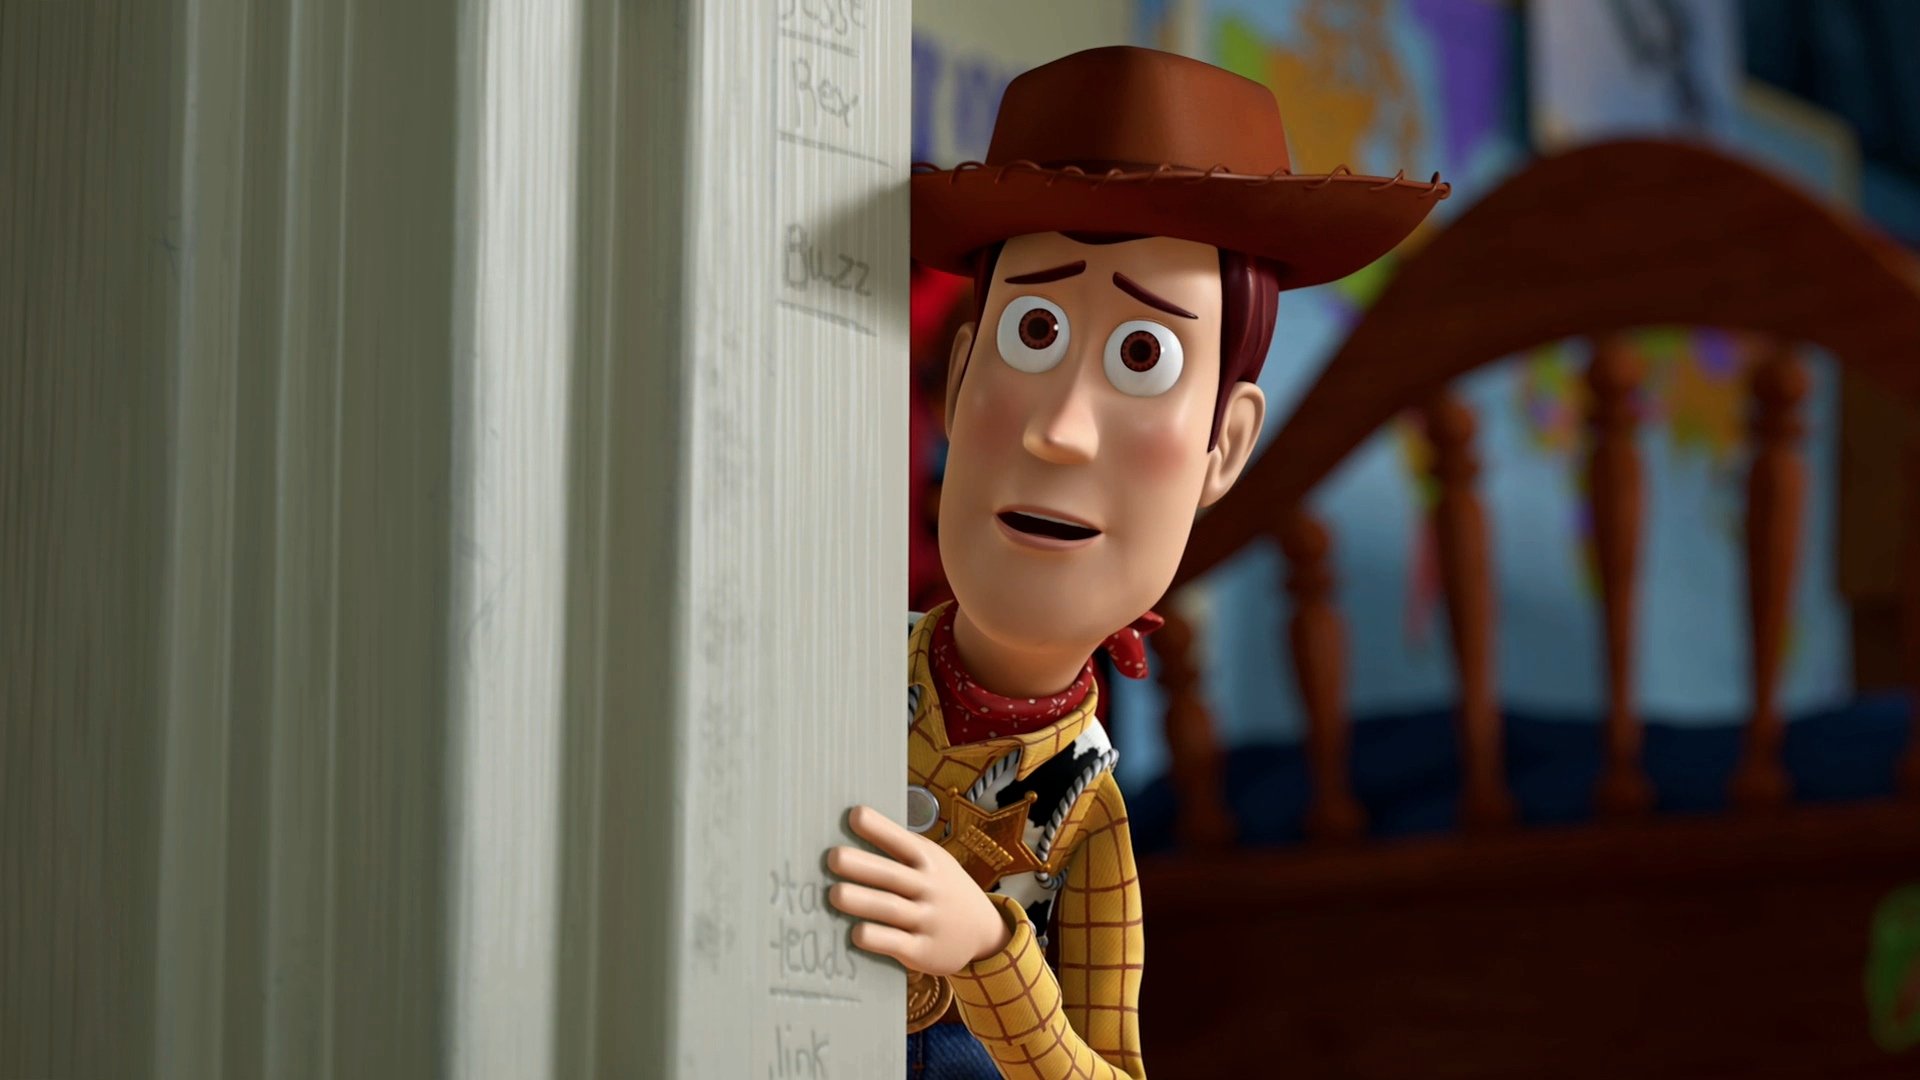 Pin on Woody toy story